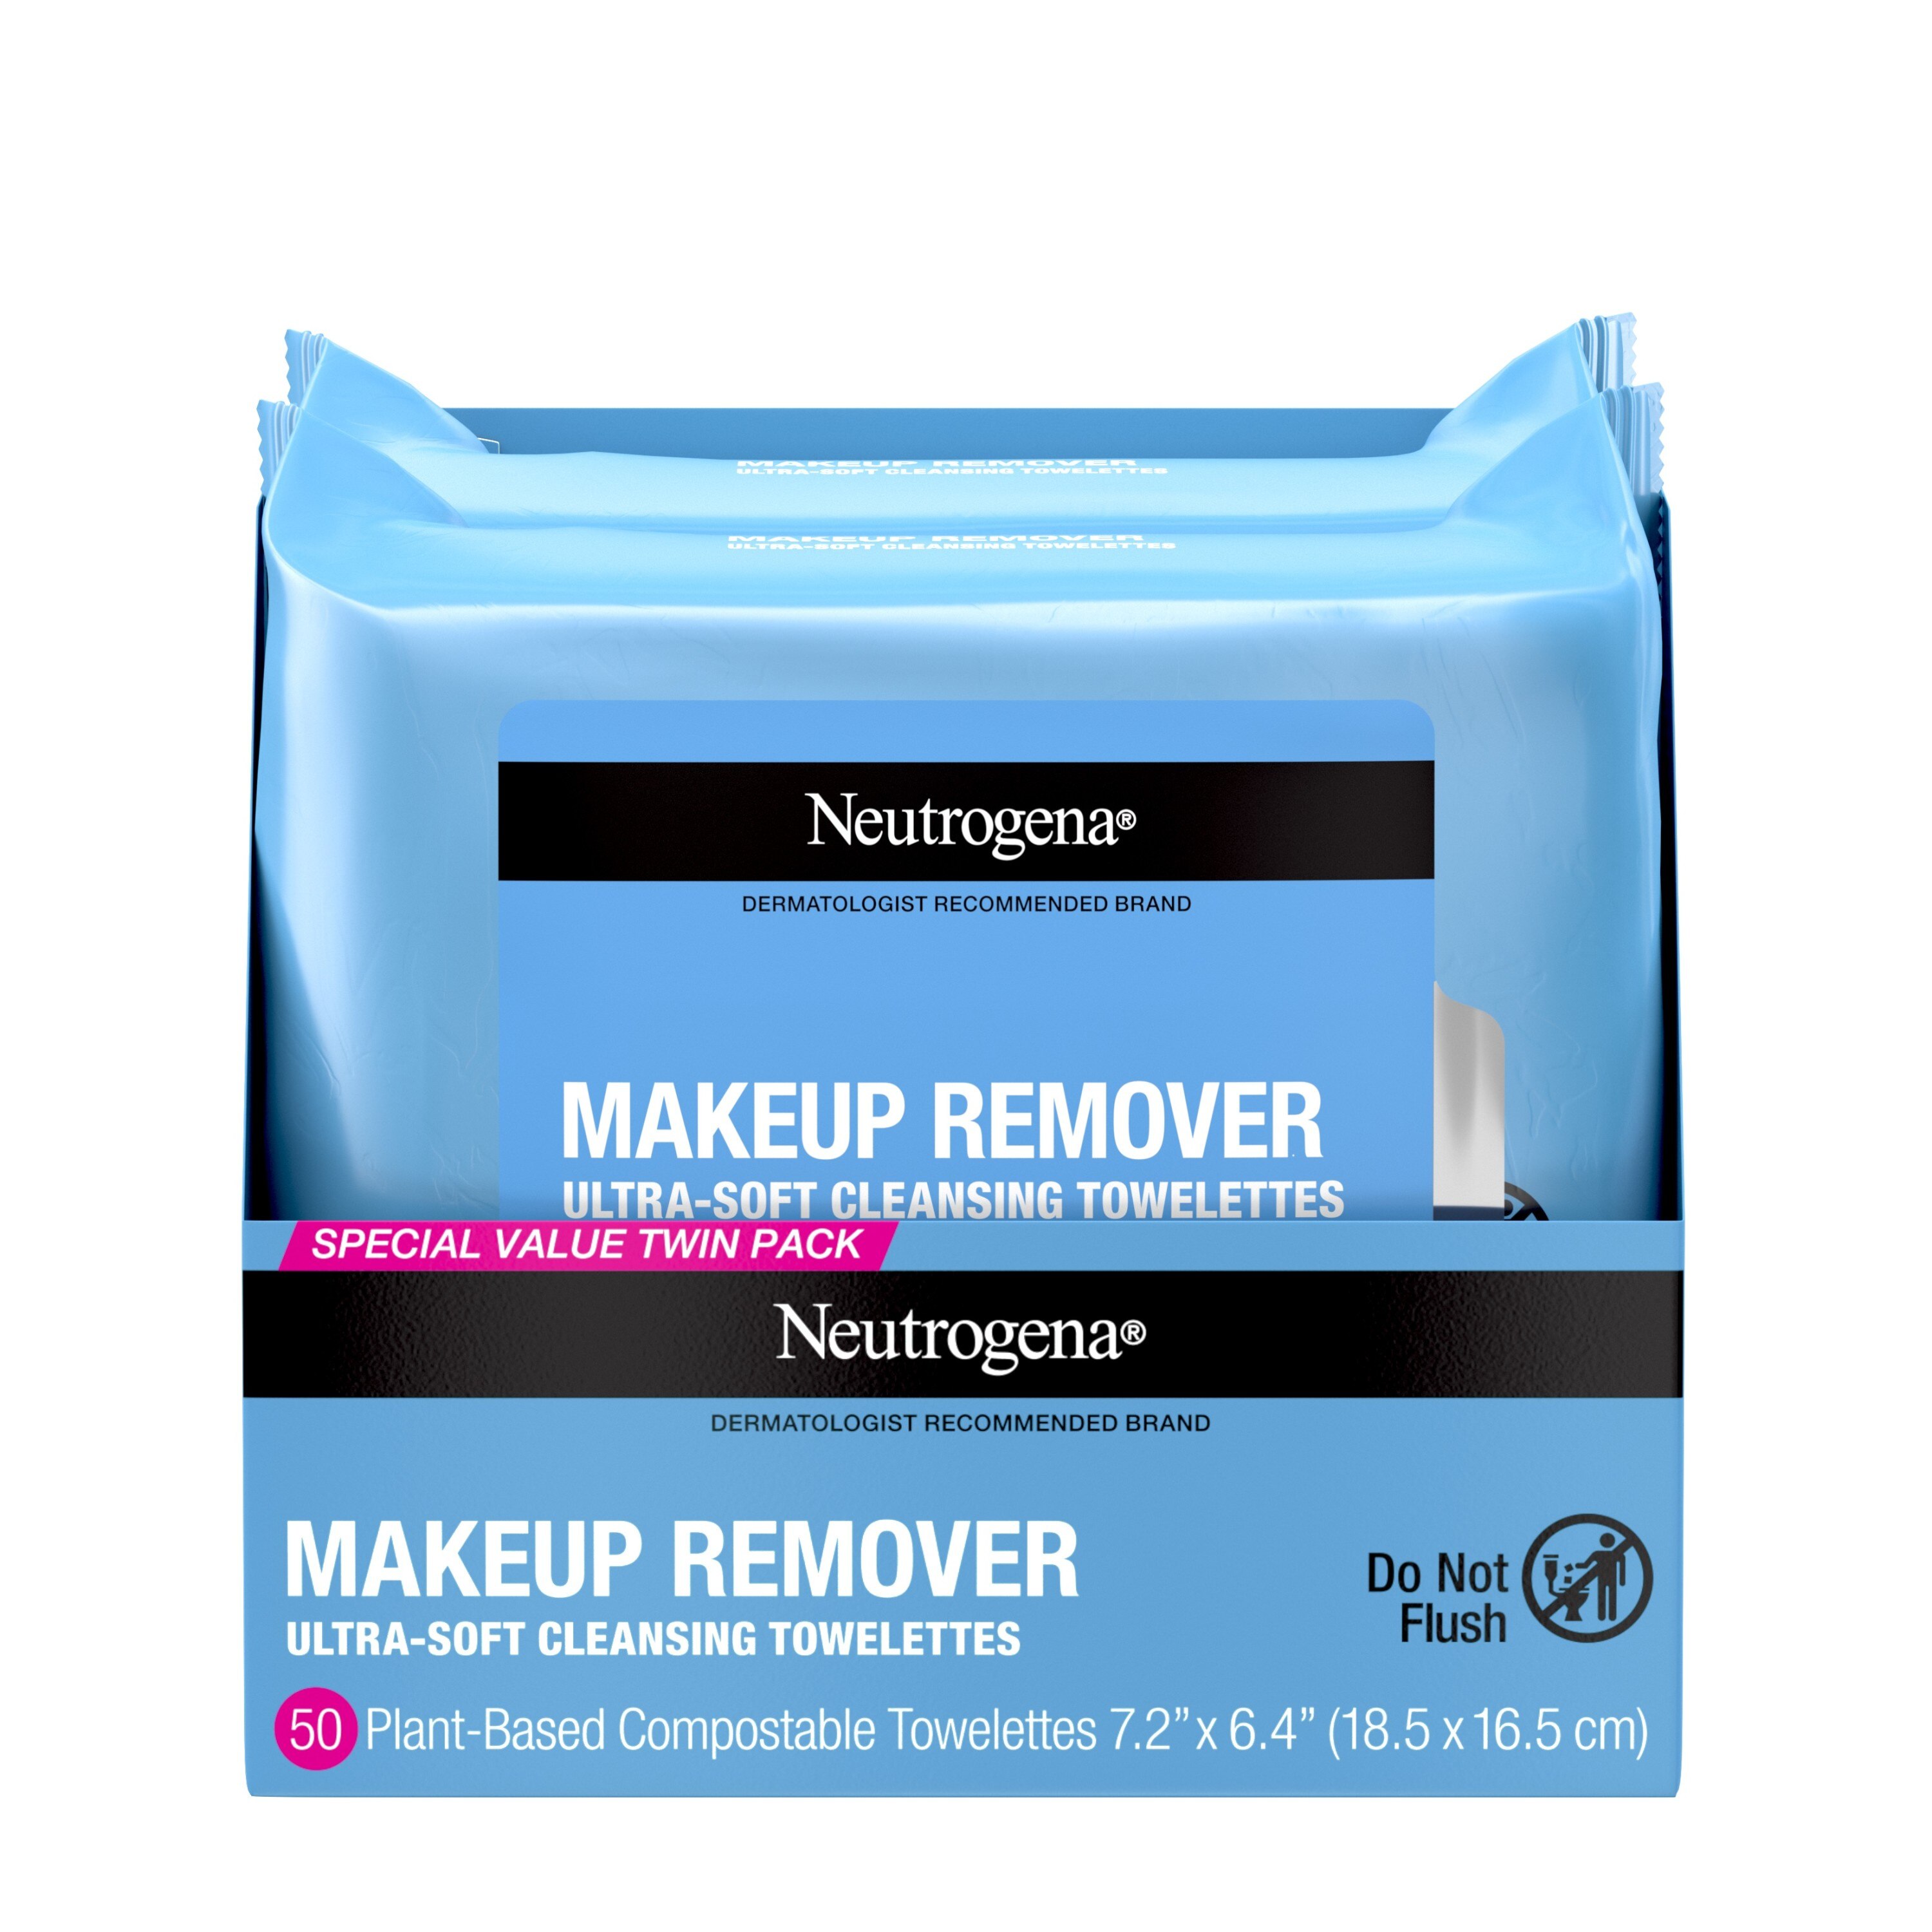 Neutrogena Makeup Remover Cleansing Towelettes Twin Pack, 50CT